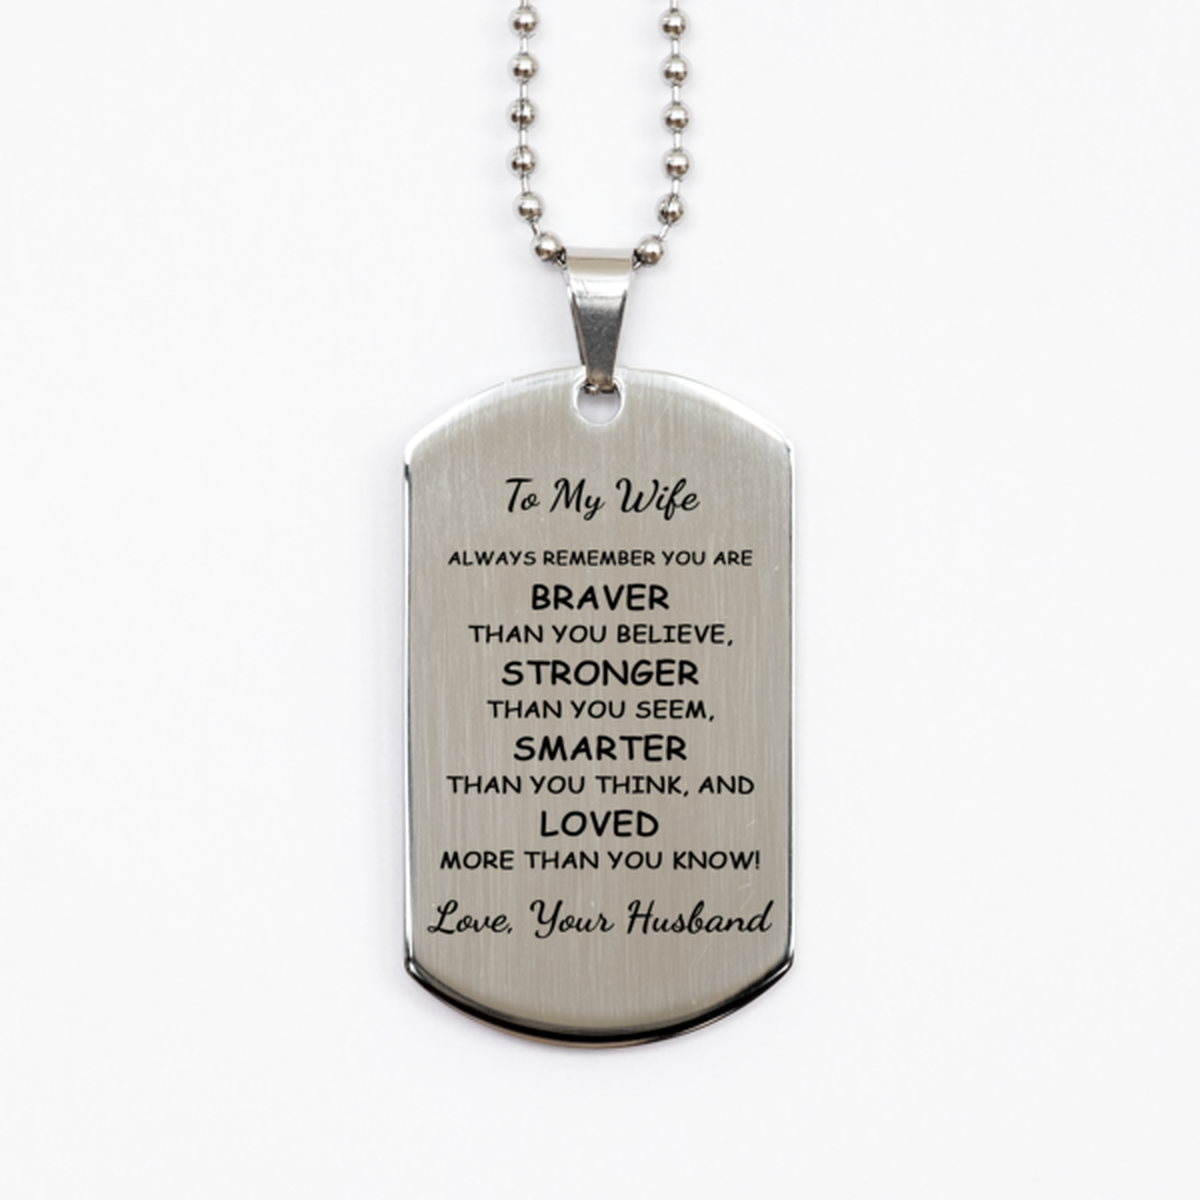 To My Wife Necklace from Husband, Gift for Wife, Stainless Steel Dog Tag, You Are Braver Than You Believe, Birthday Gift